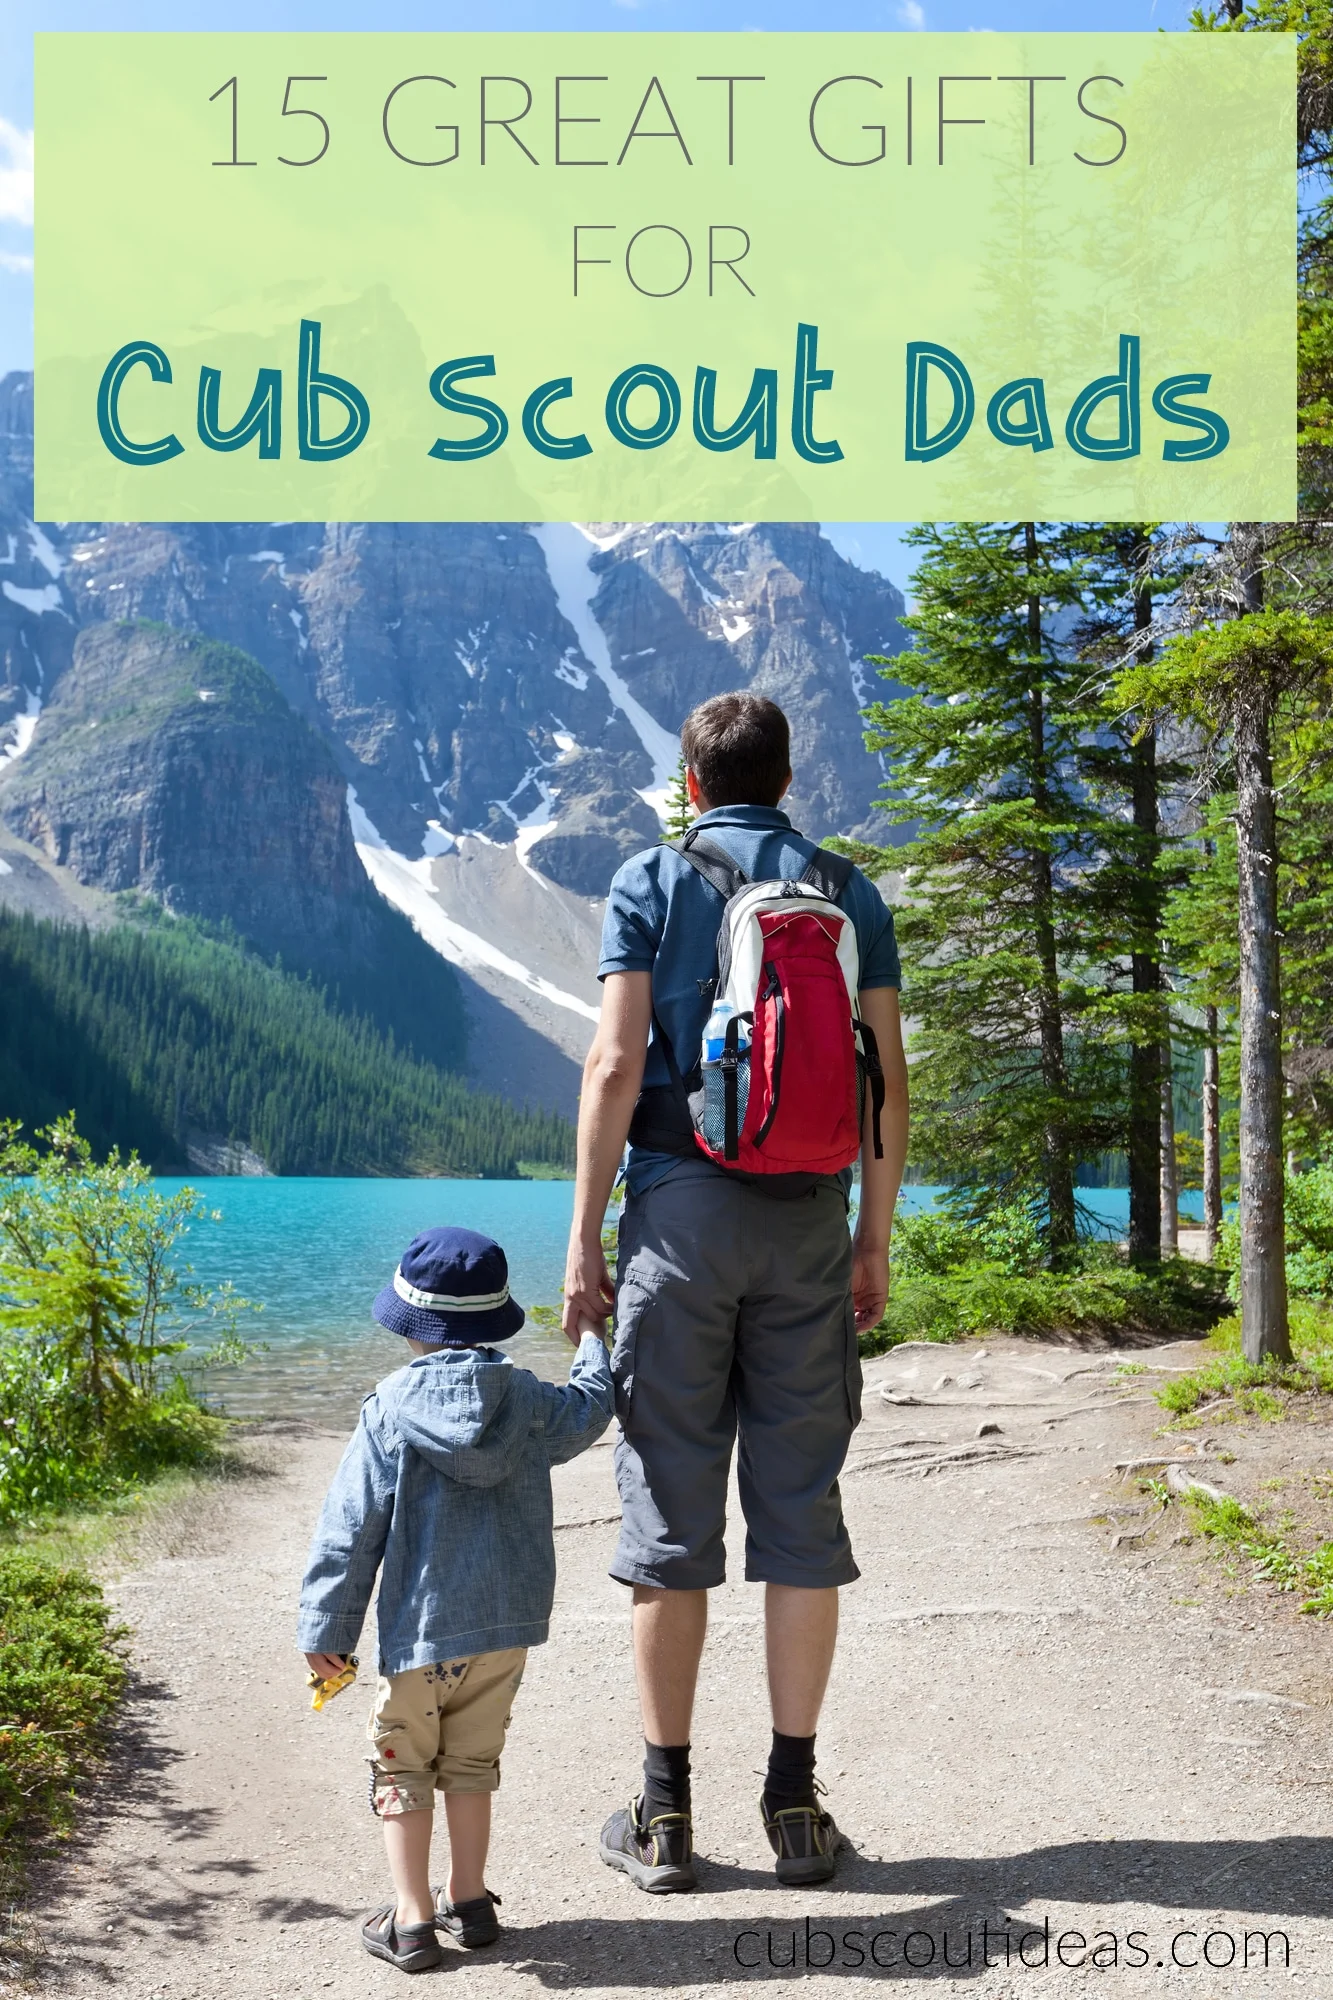 cub scout dad gifts